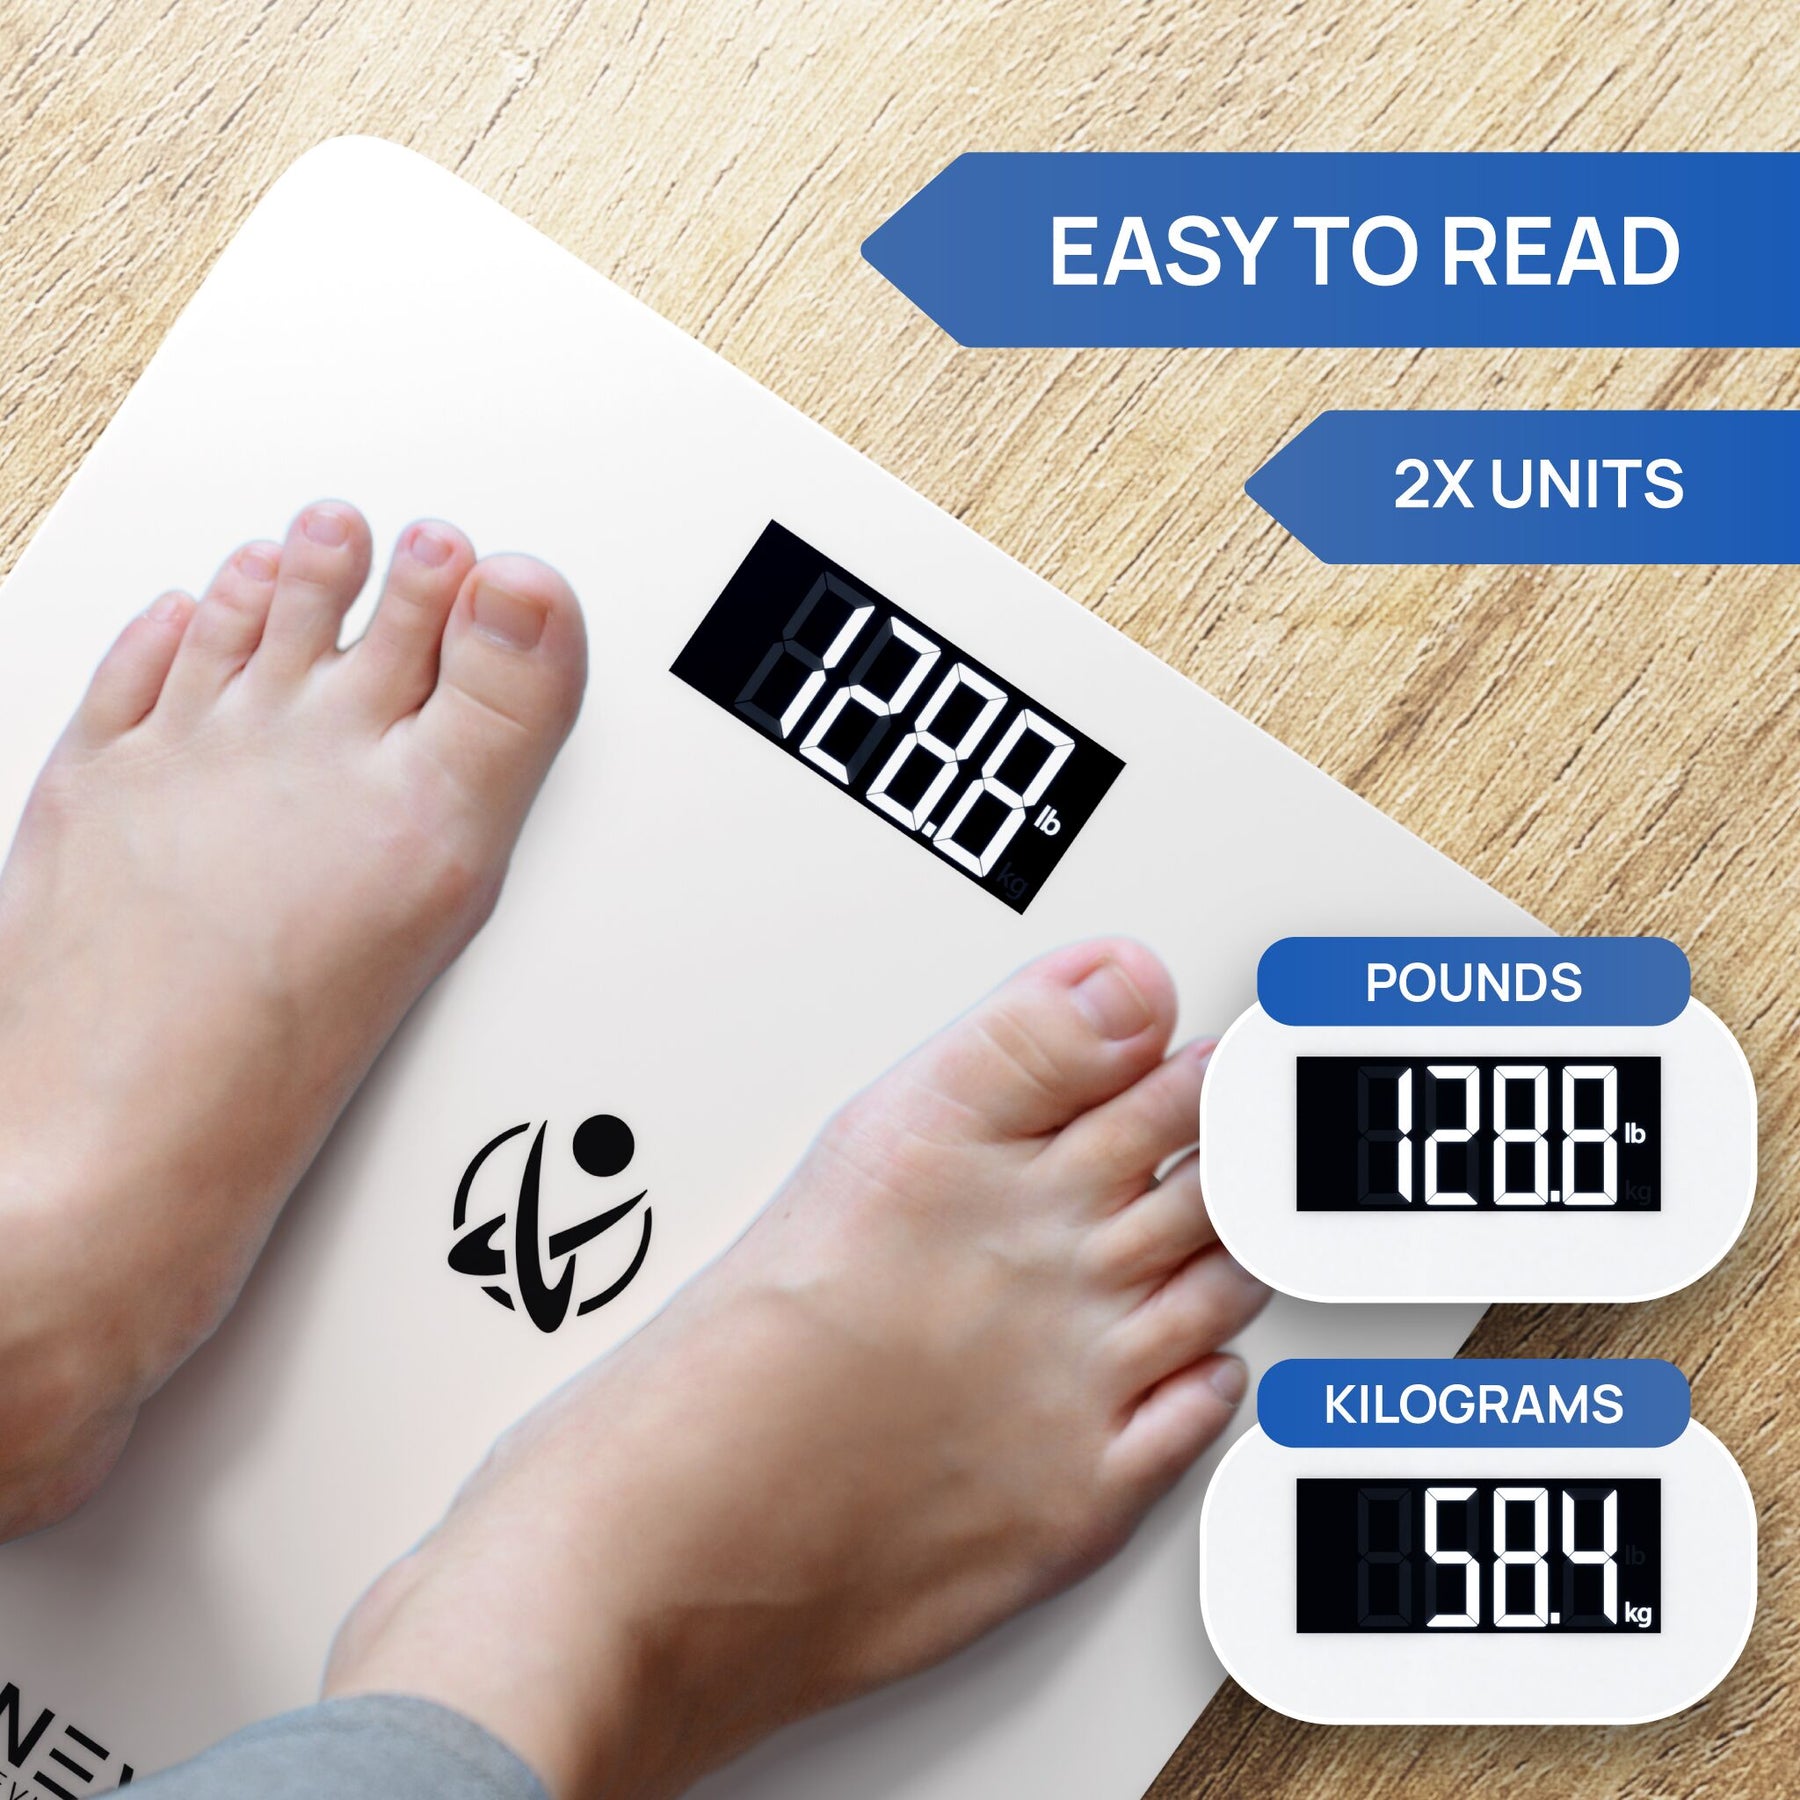 Smart Body Weight Scale I-SS001 Series